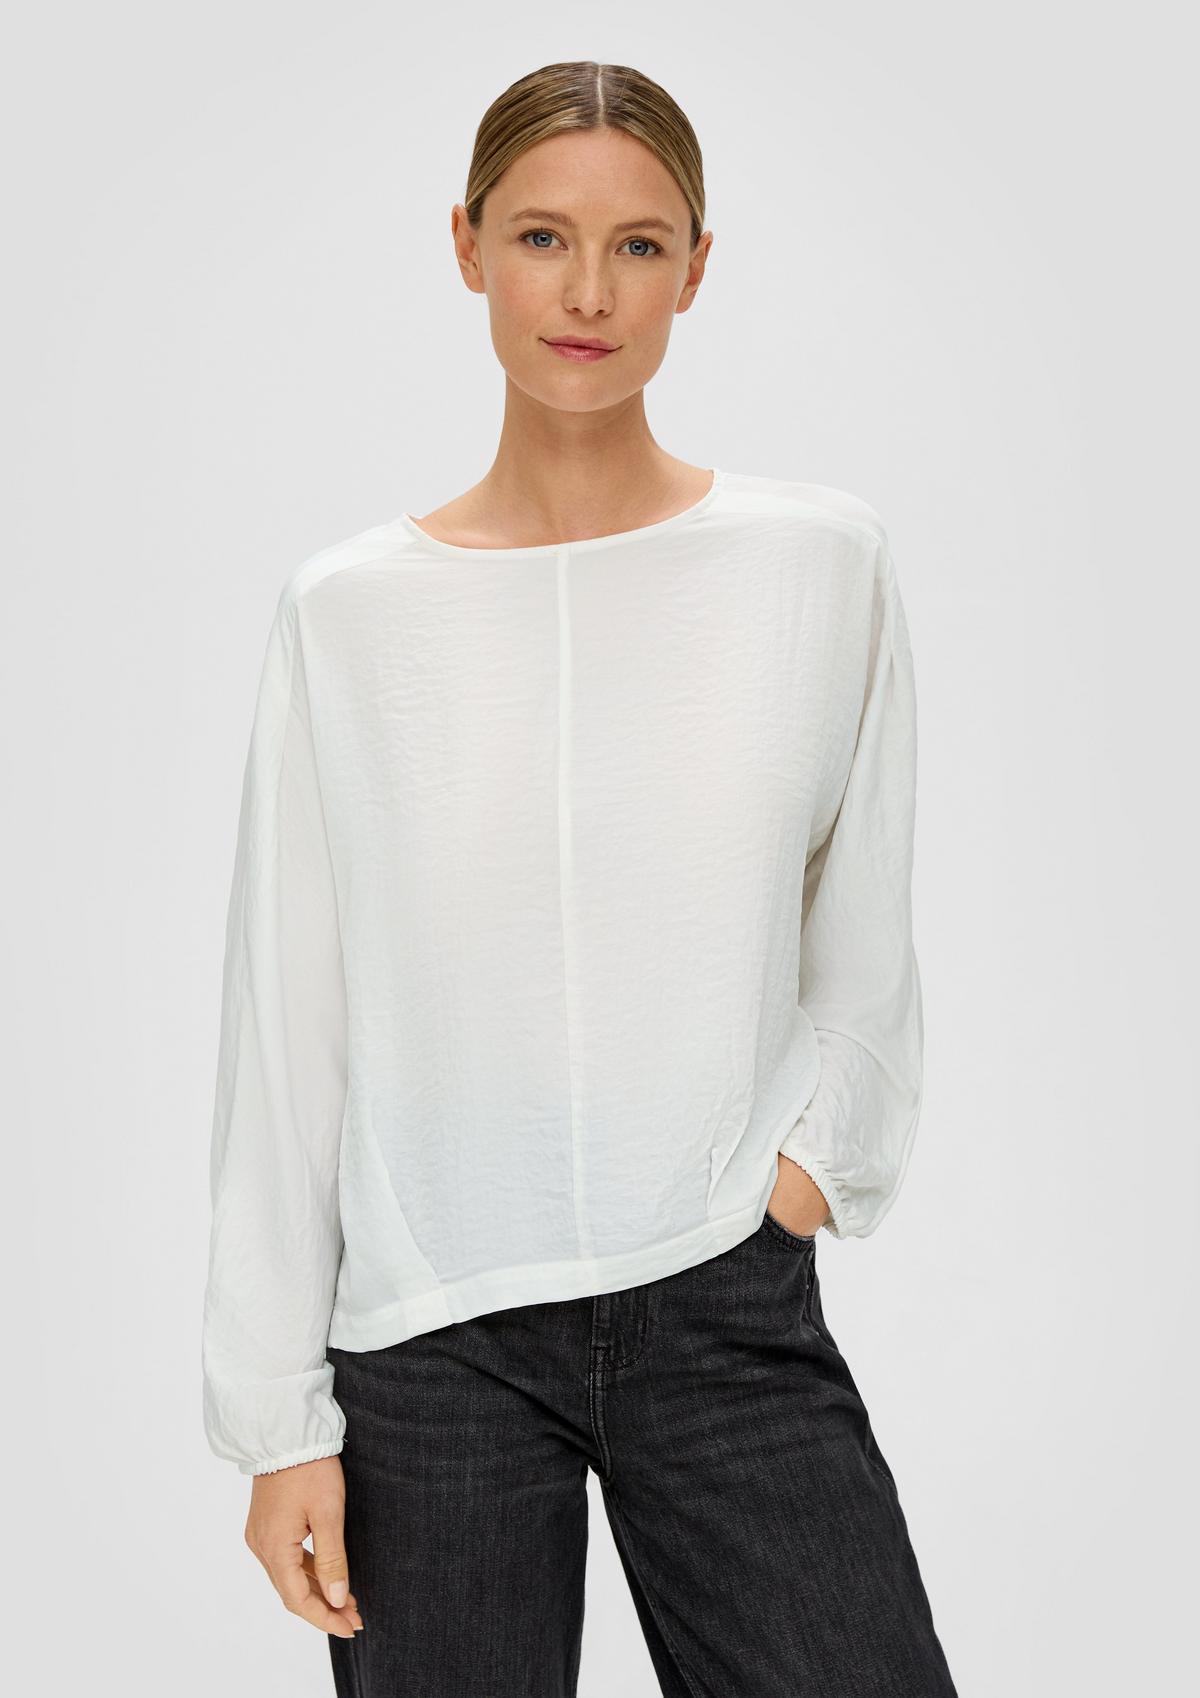 Blouse with batwing sleeves